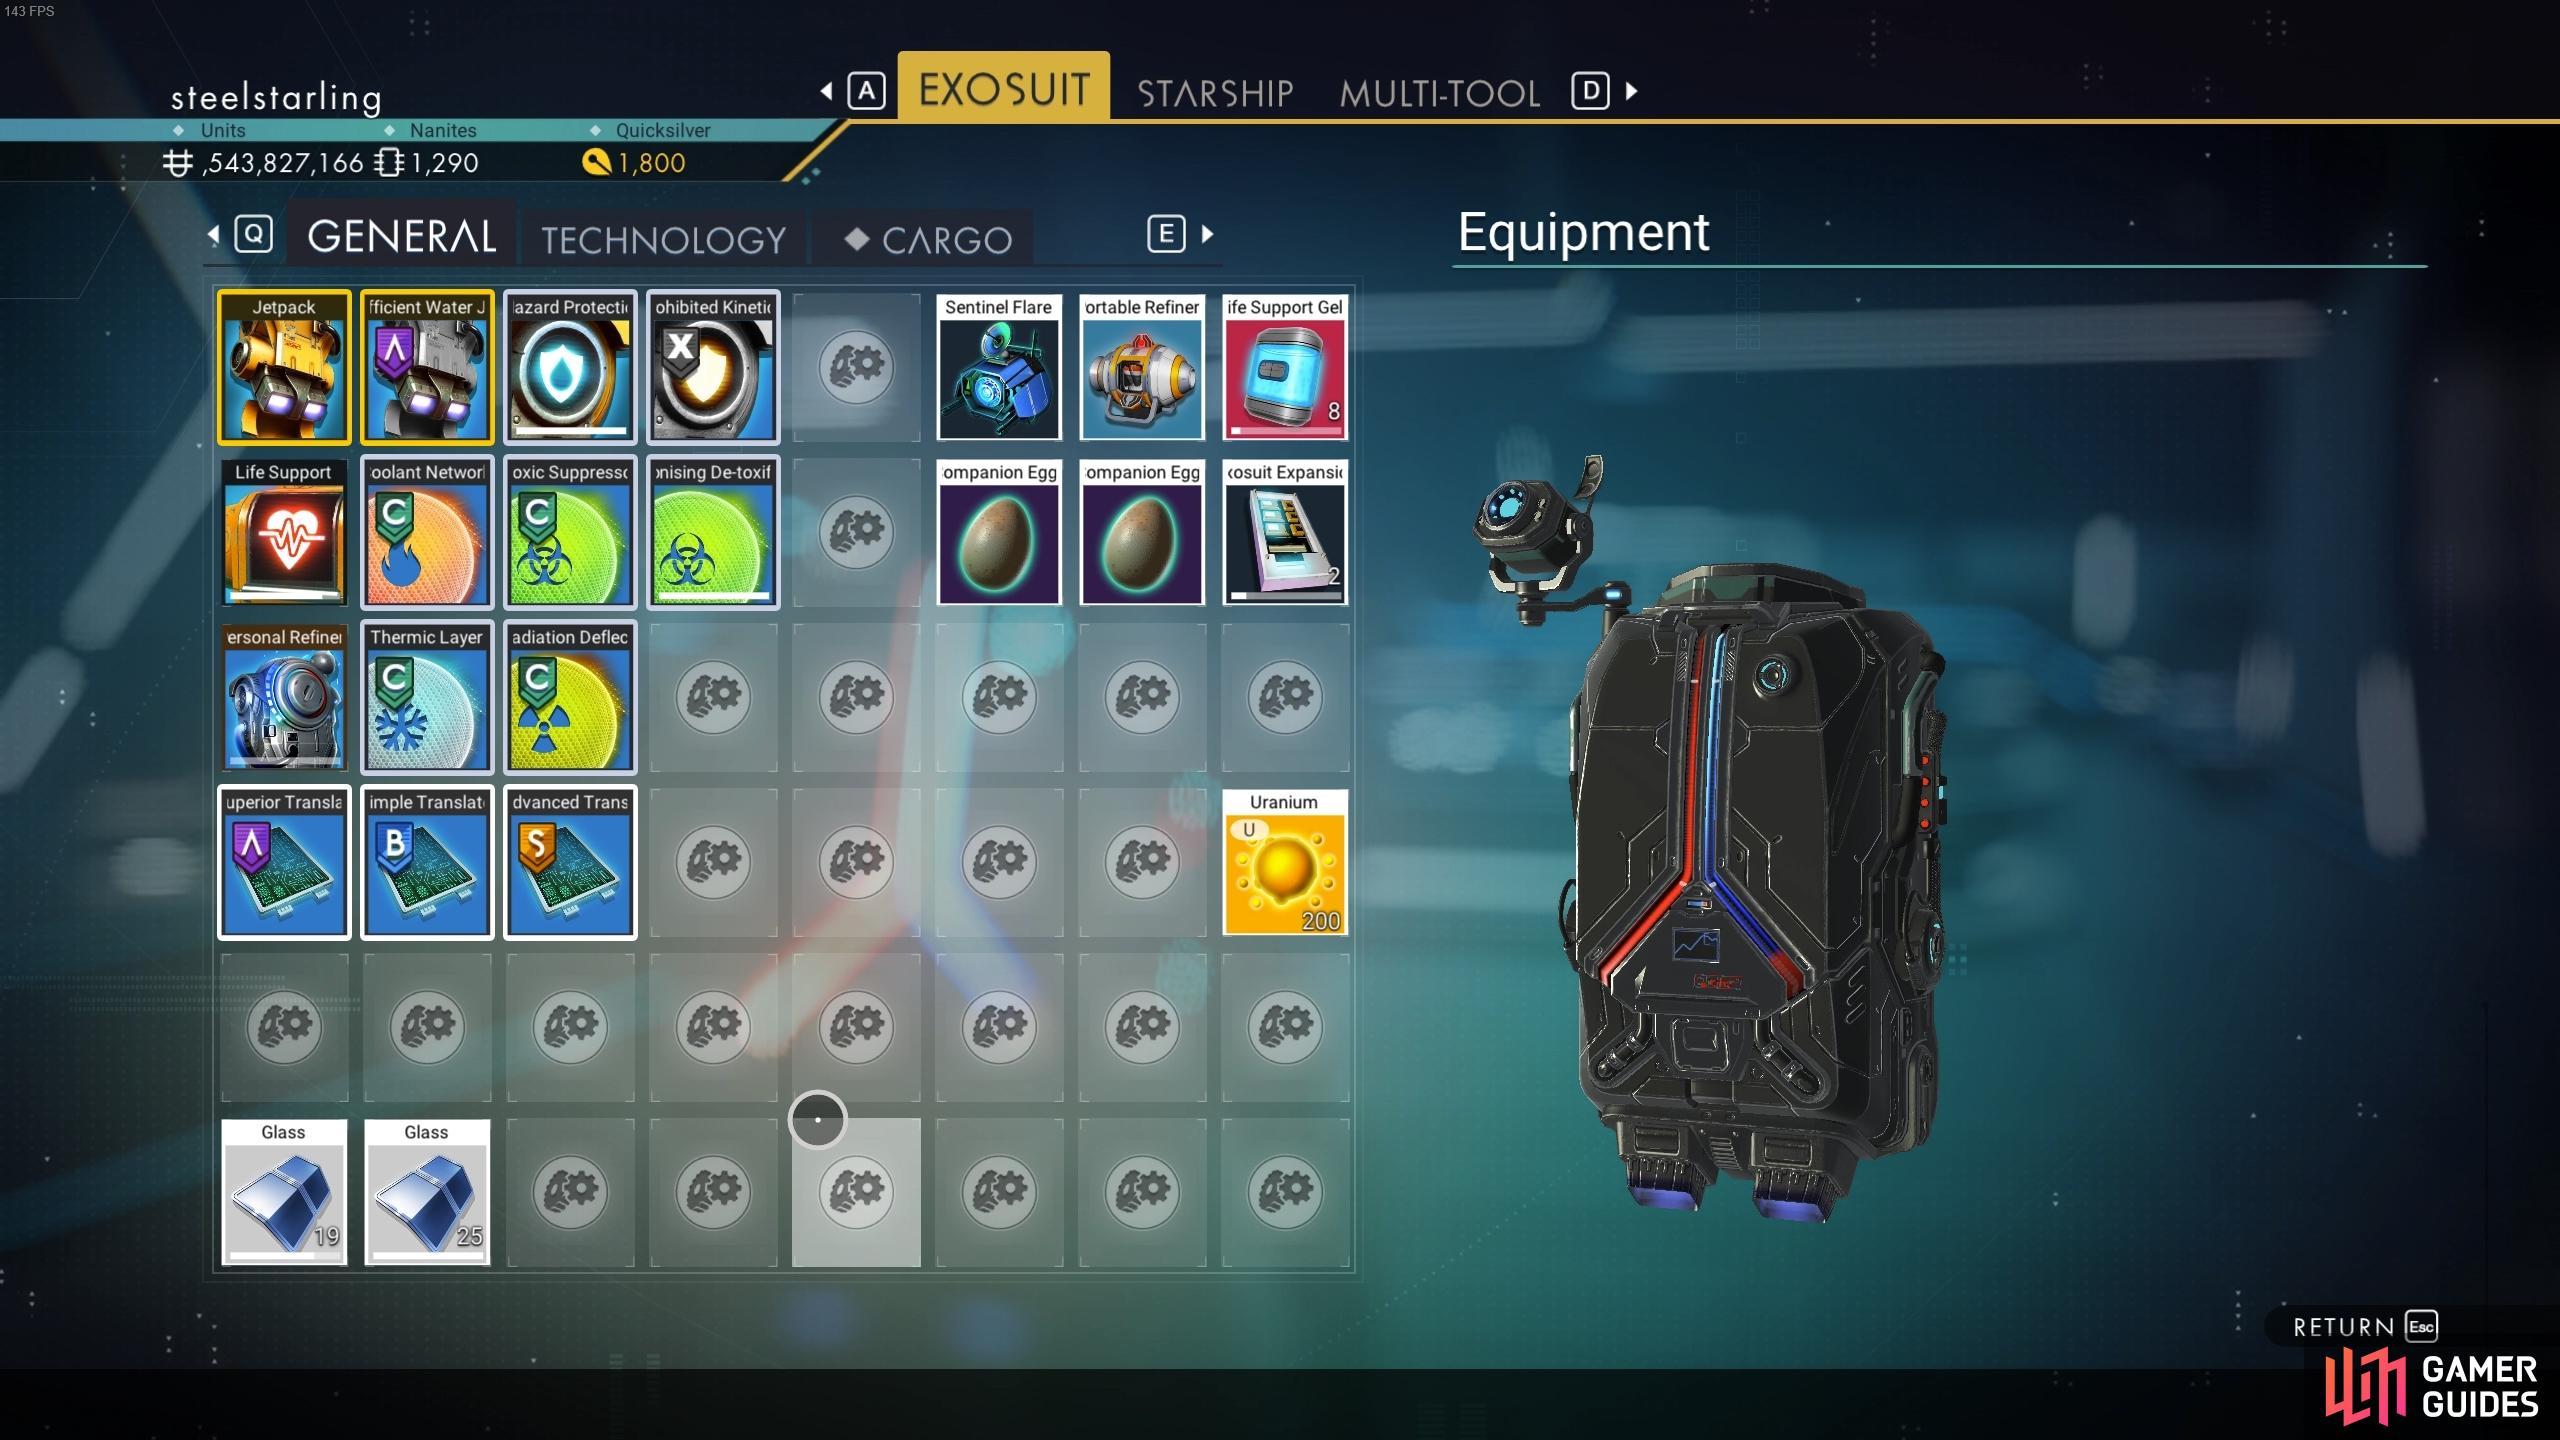 The General inventory slots can be used for anything, even technology components.